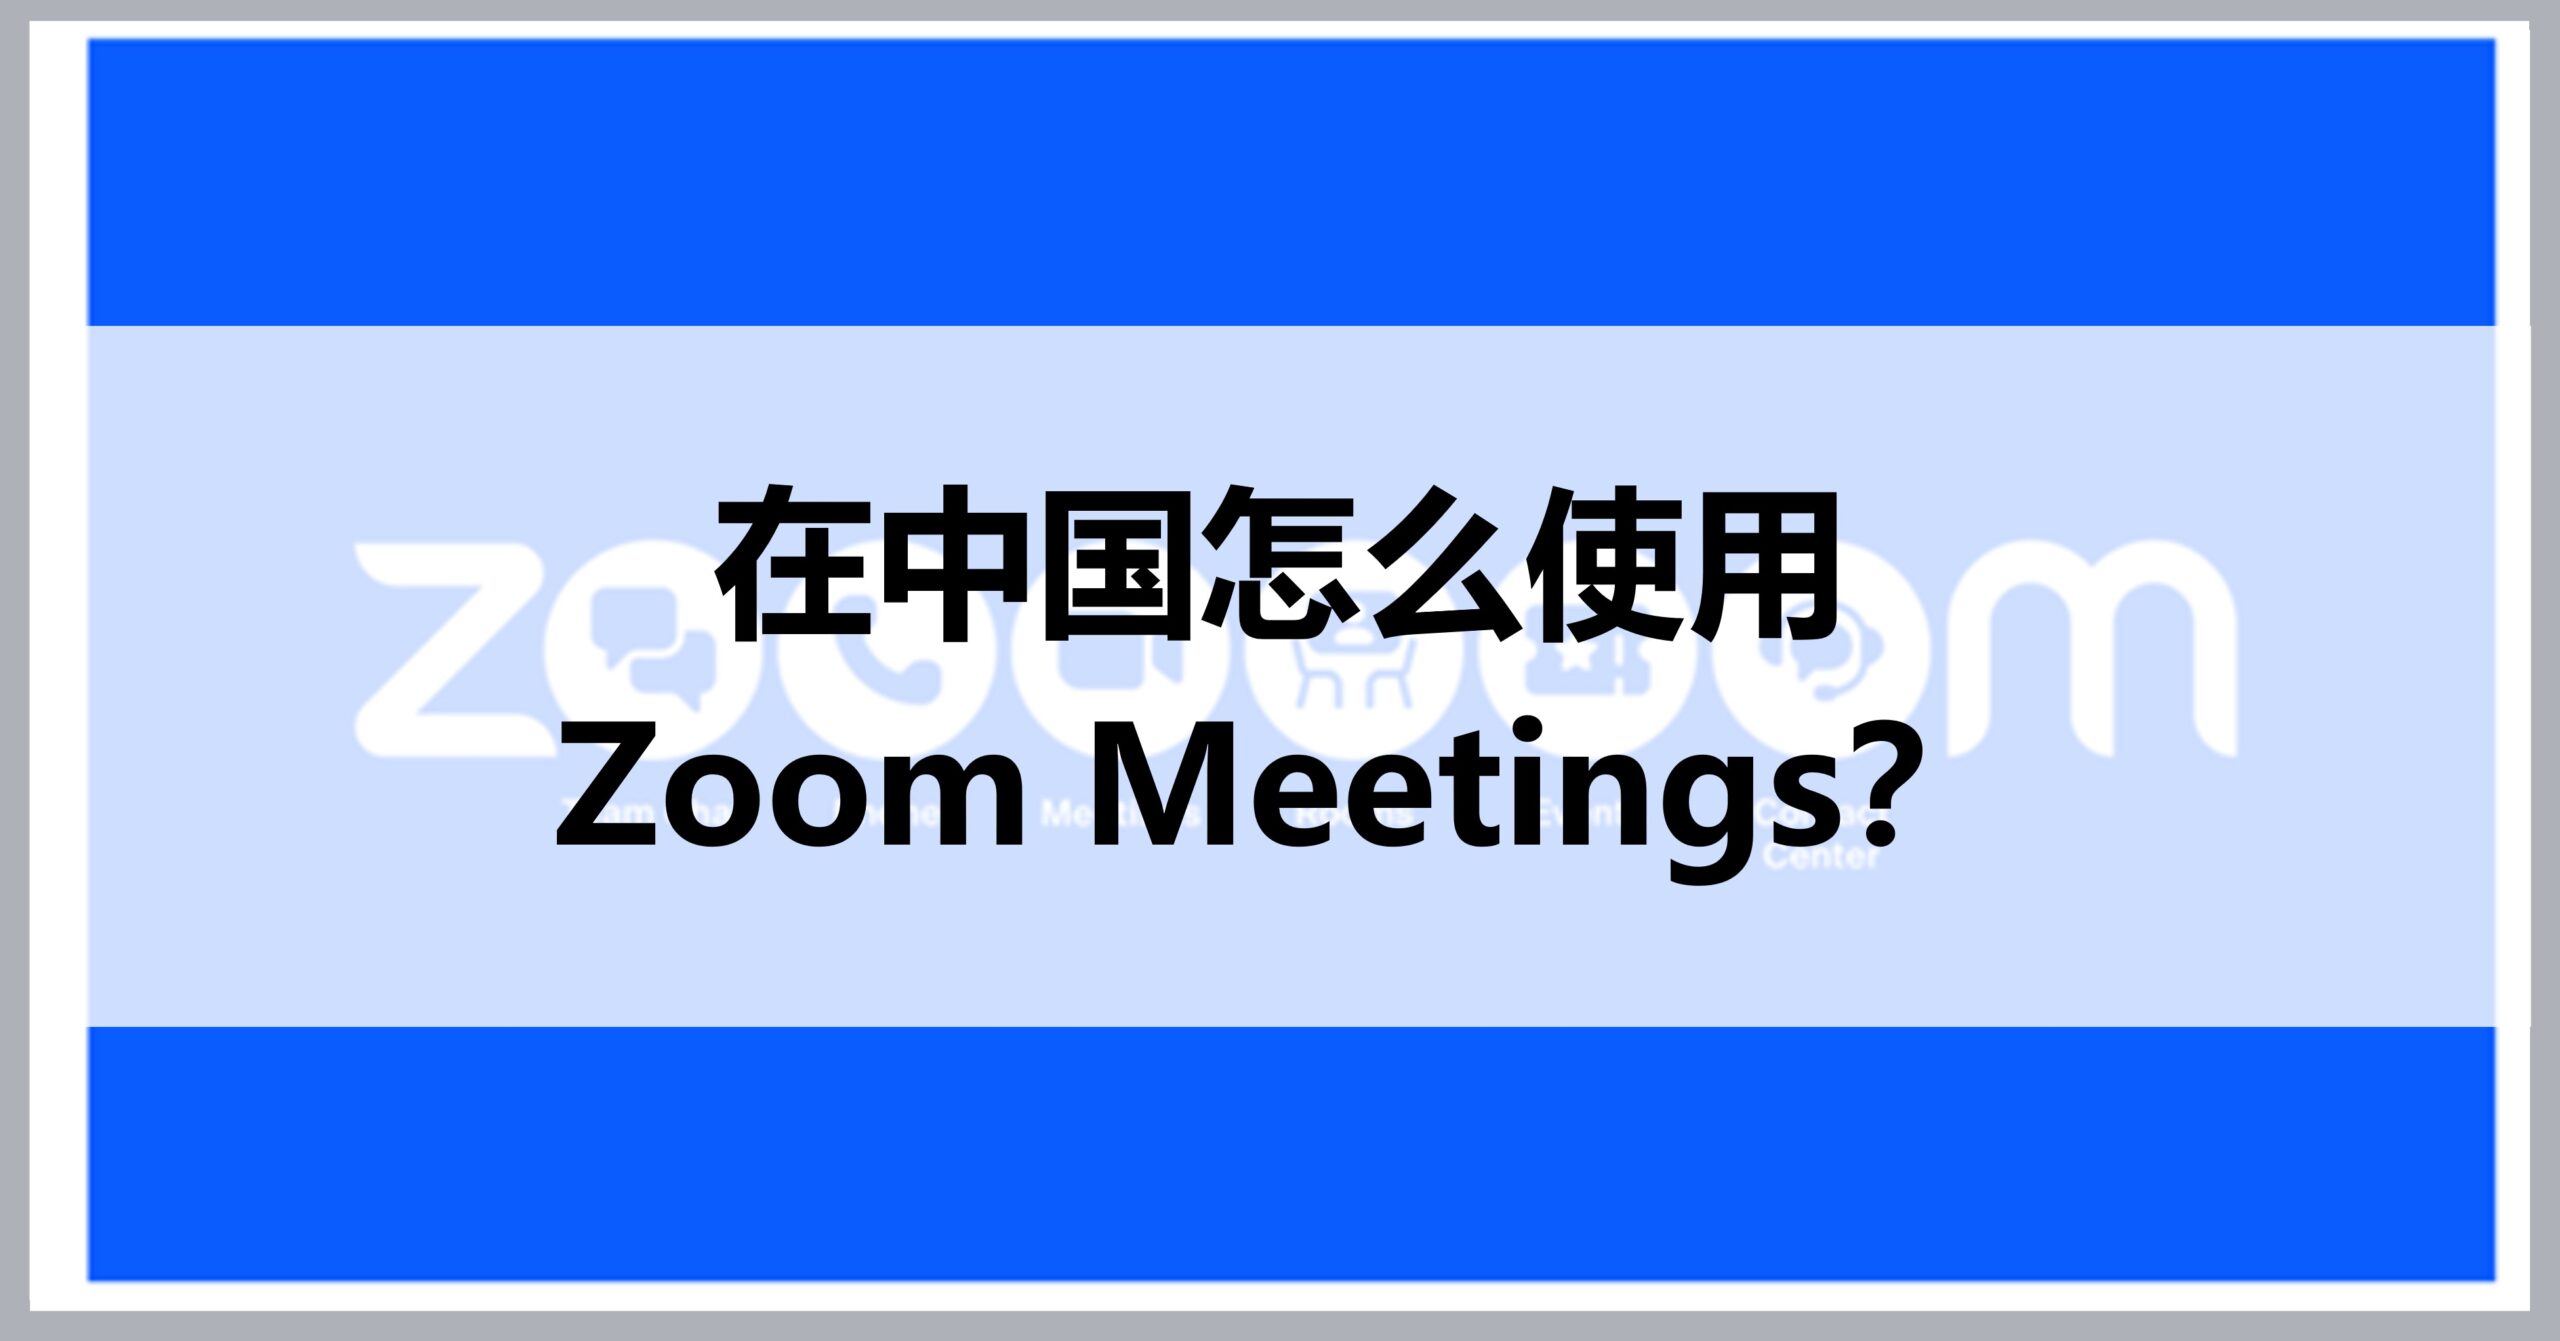 How to use ZOOM in China